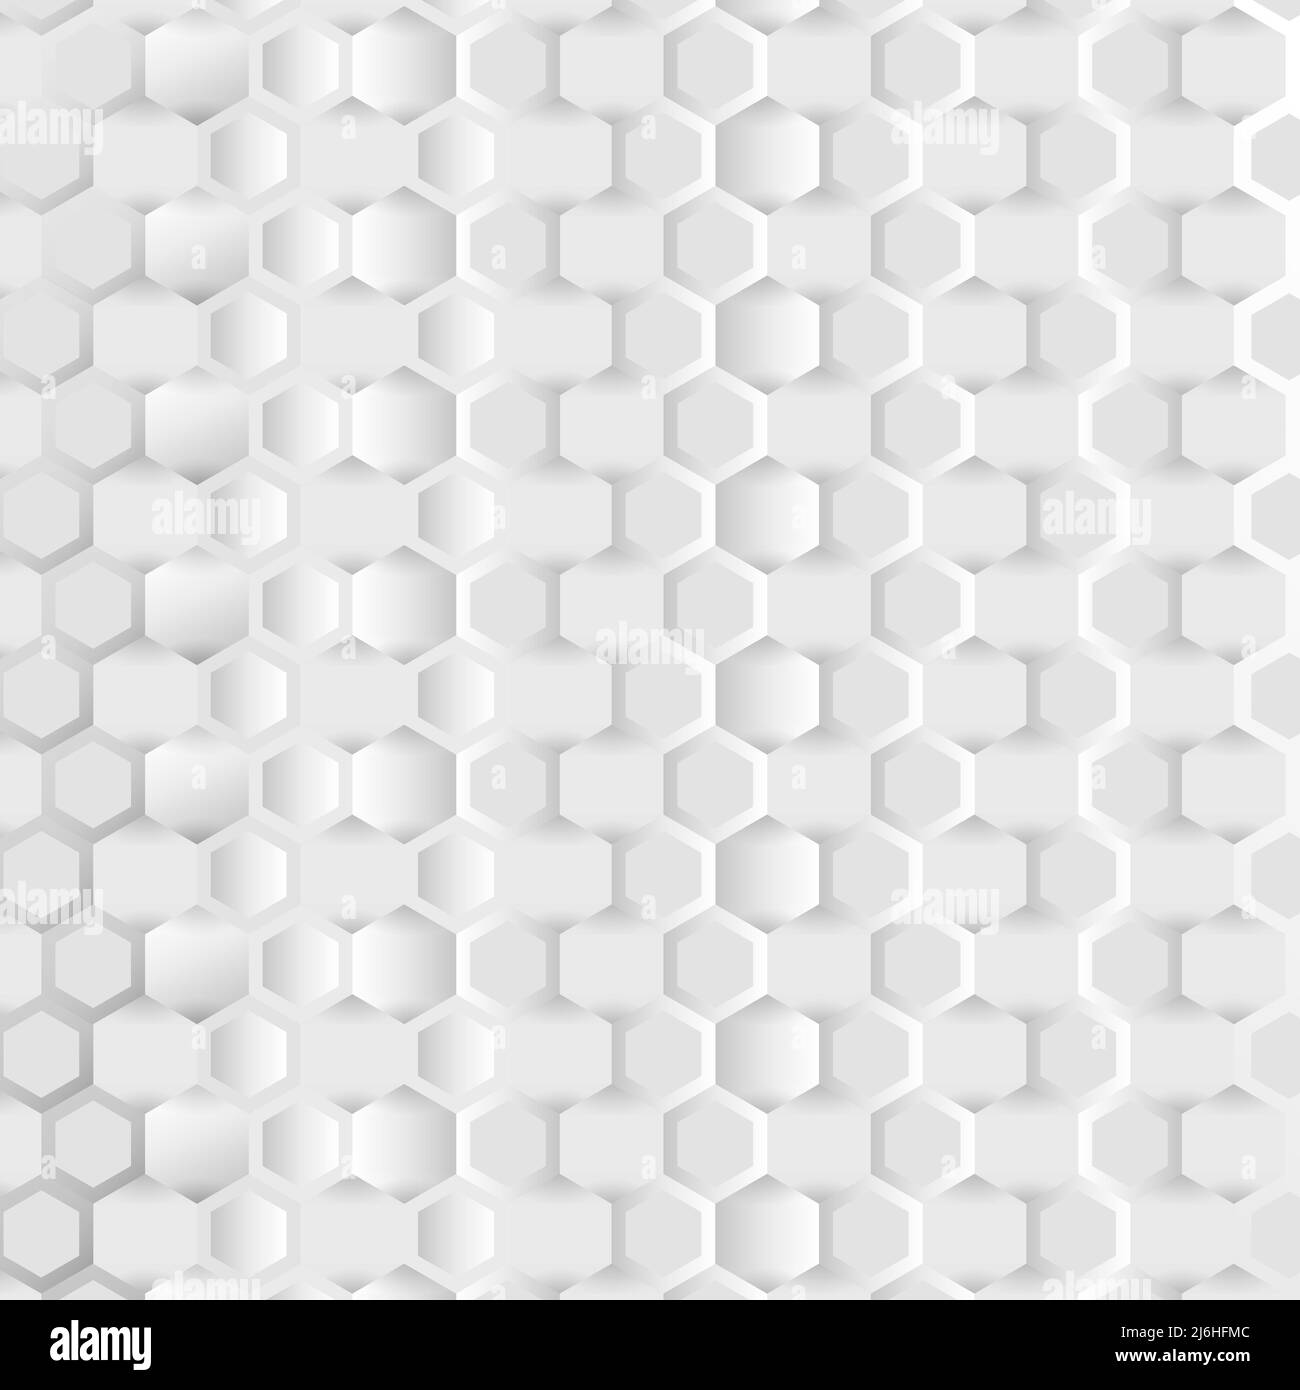 Adstract connection background with hexagonal white and grey pattern Stock Vector